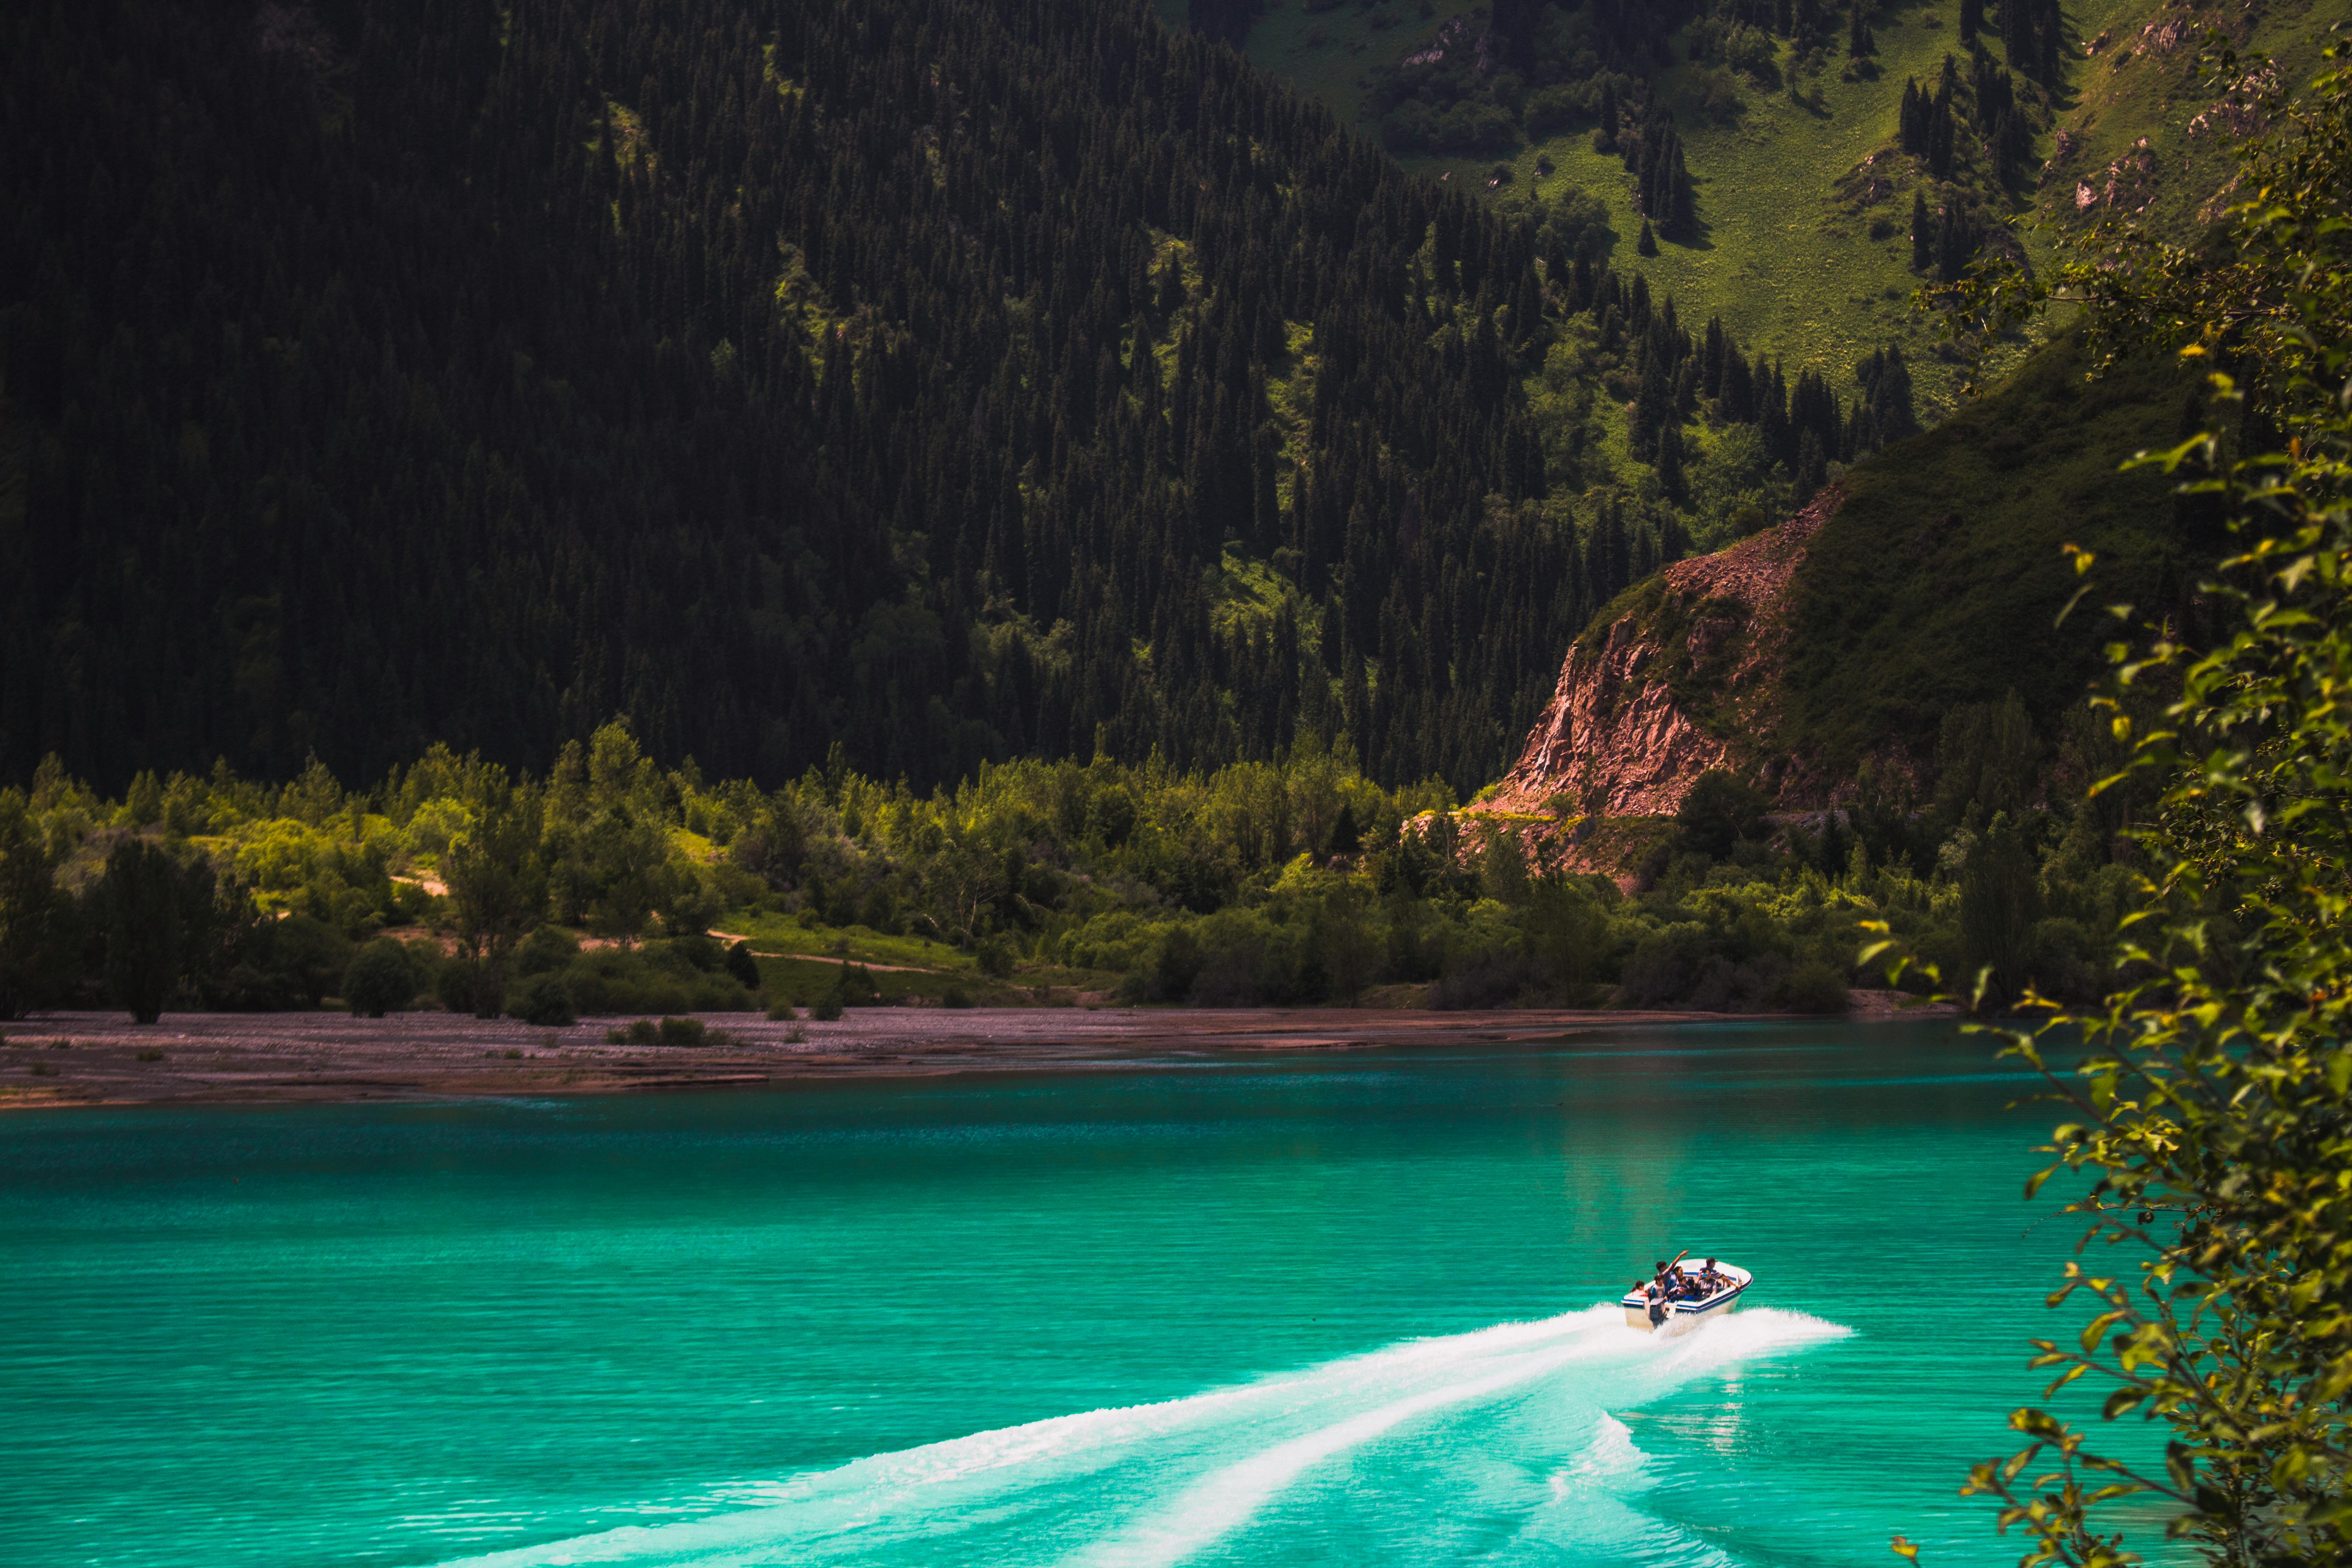 39 Speed Boat Drawing Stock Photos, High-Res Pictures, and Images